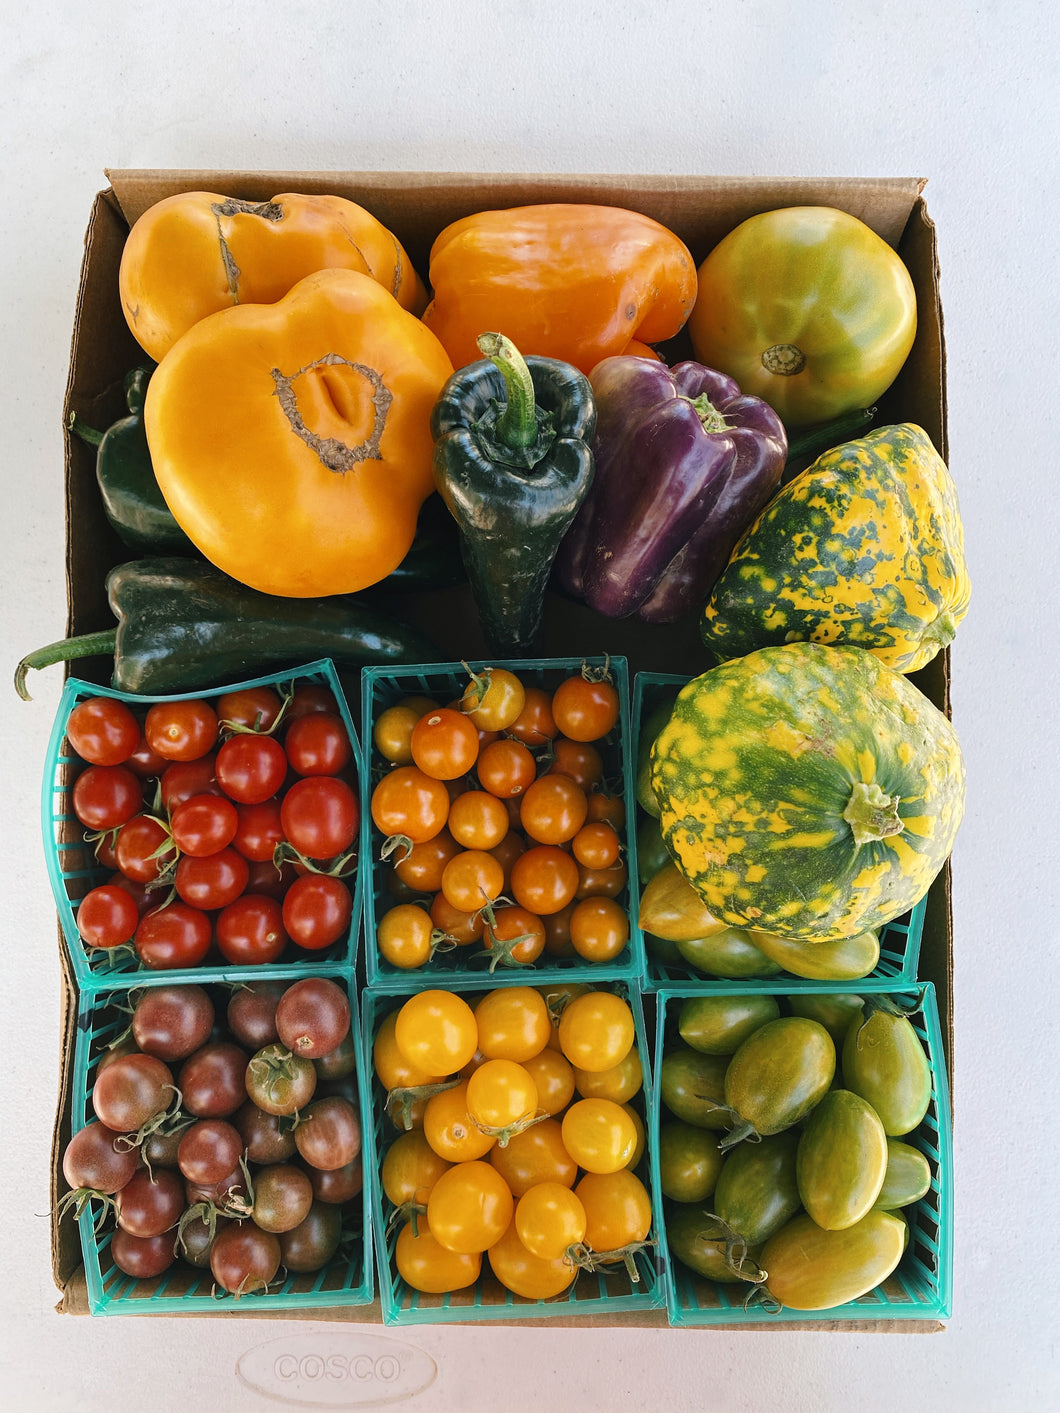 Friday Tomato & Pepper Box with Black Sheep Farms - Downtown Long Beach - 12noon - 2pm Pick-up